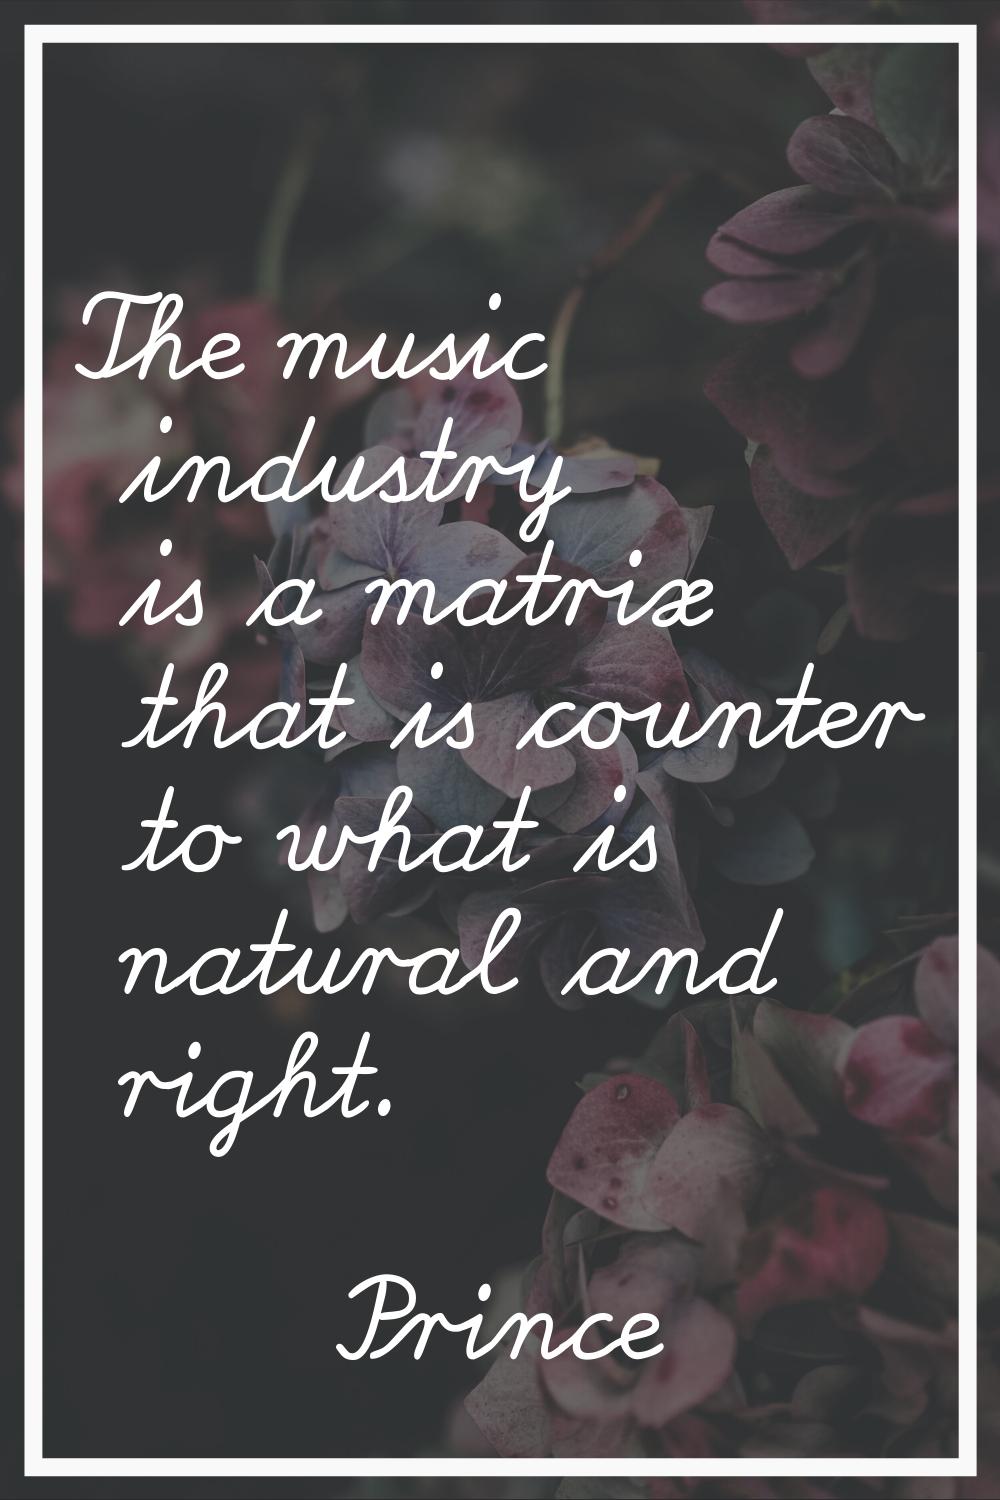 The music industry is a matrix that is counter to what is natural and right.